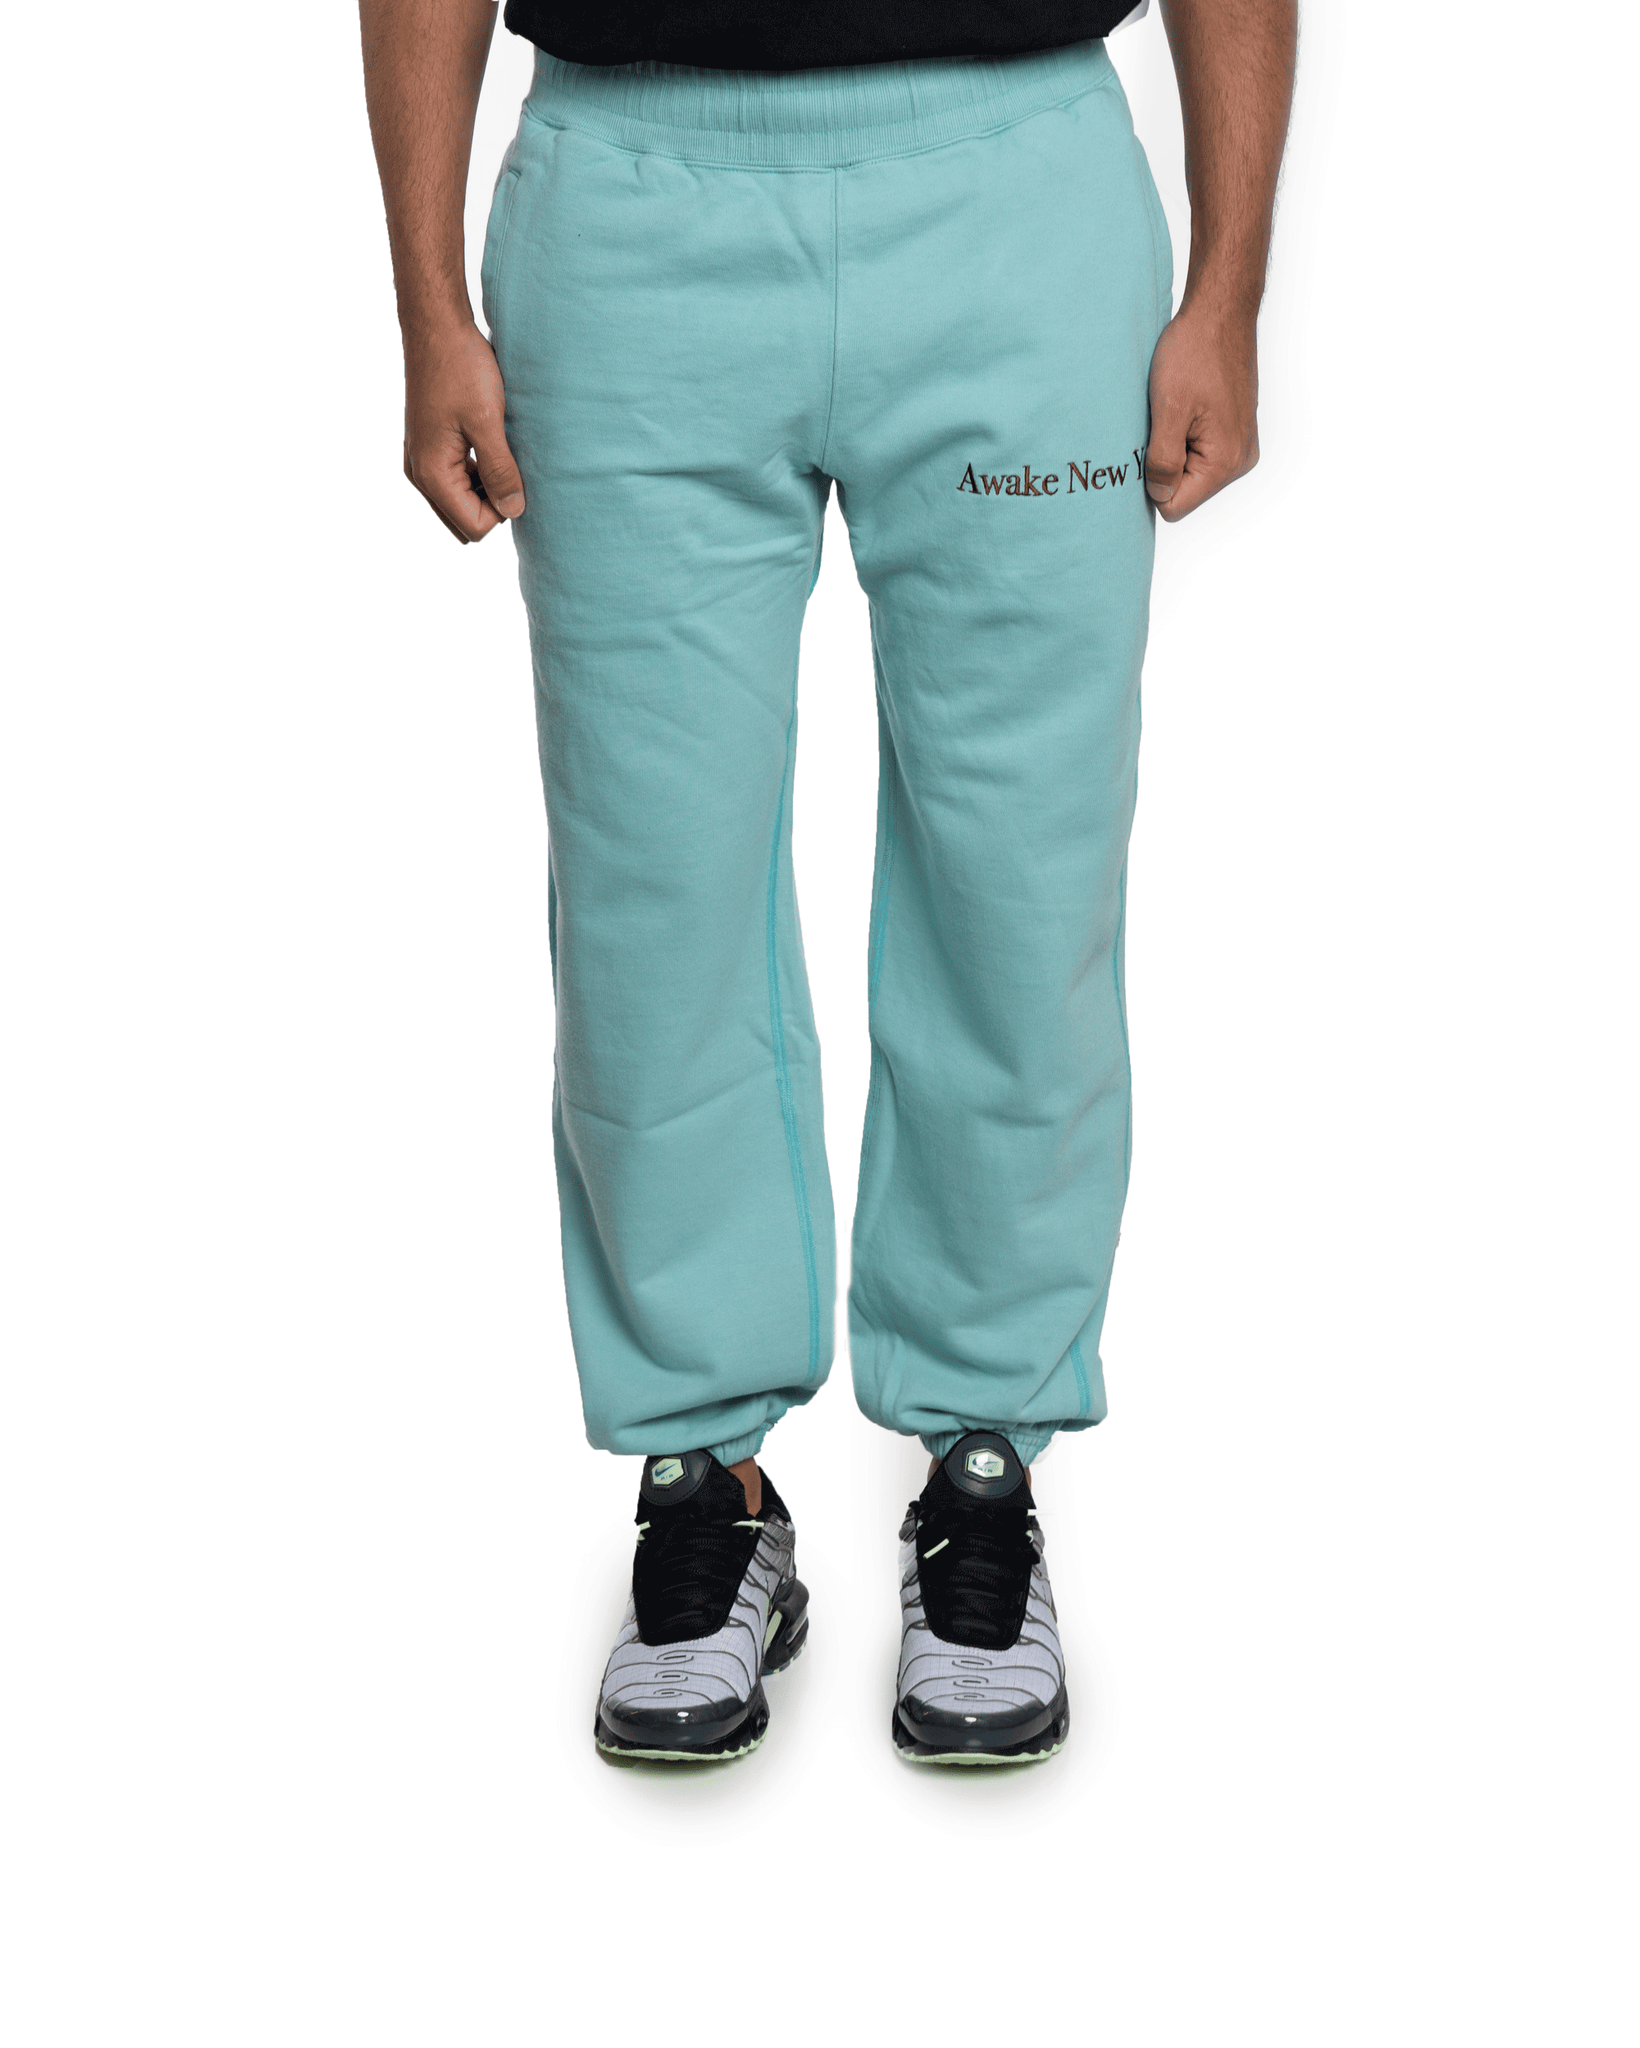 Awake NY Classic Outline Logo Panelled Embroided Sweatpants Teal